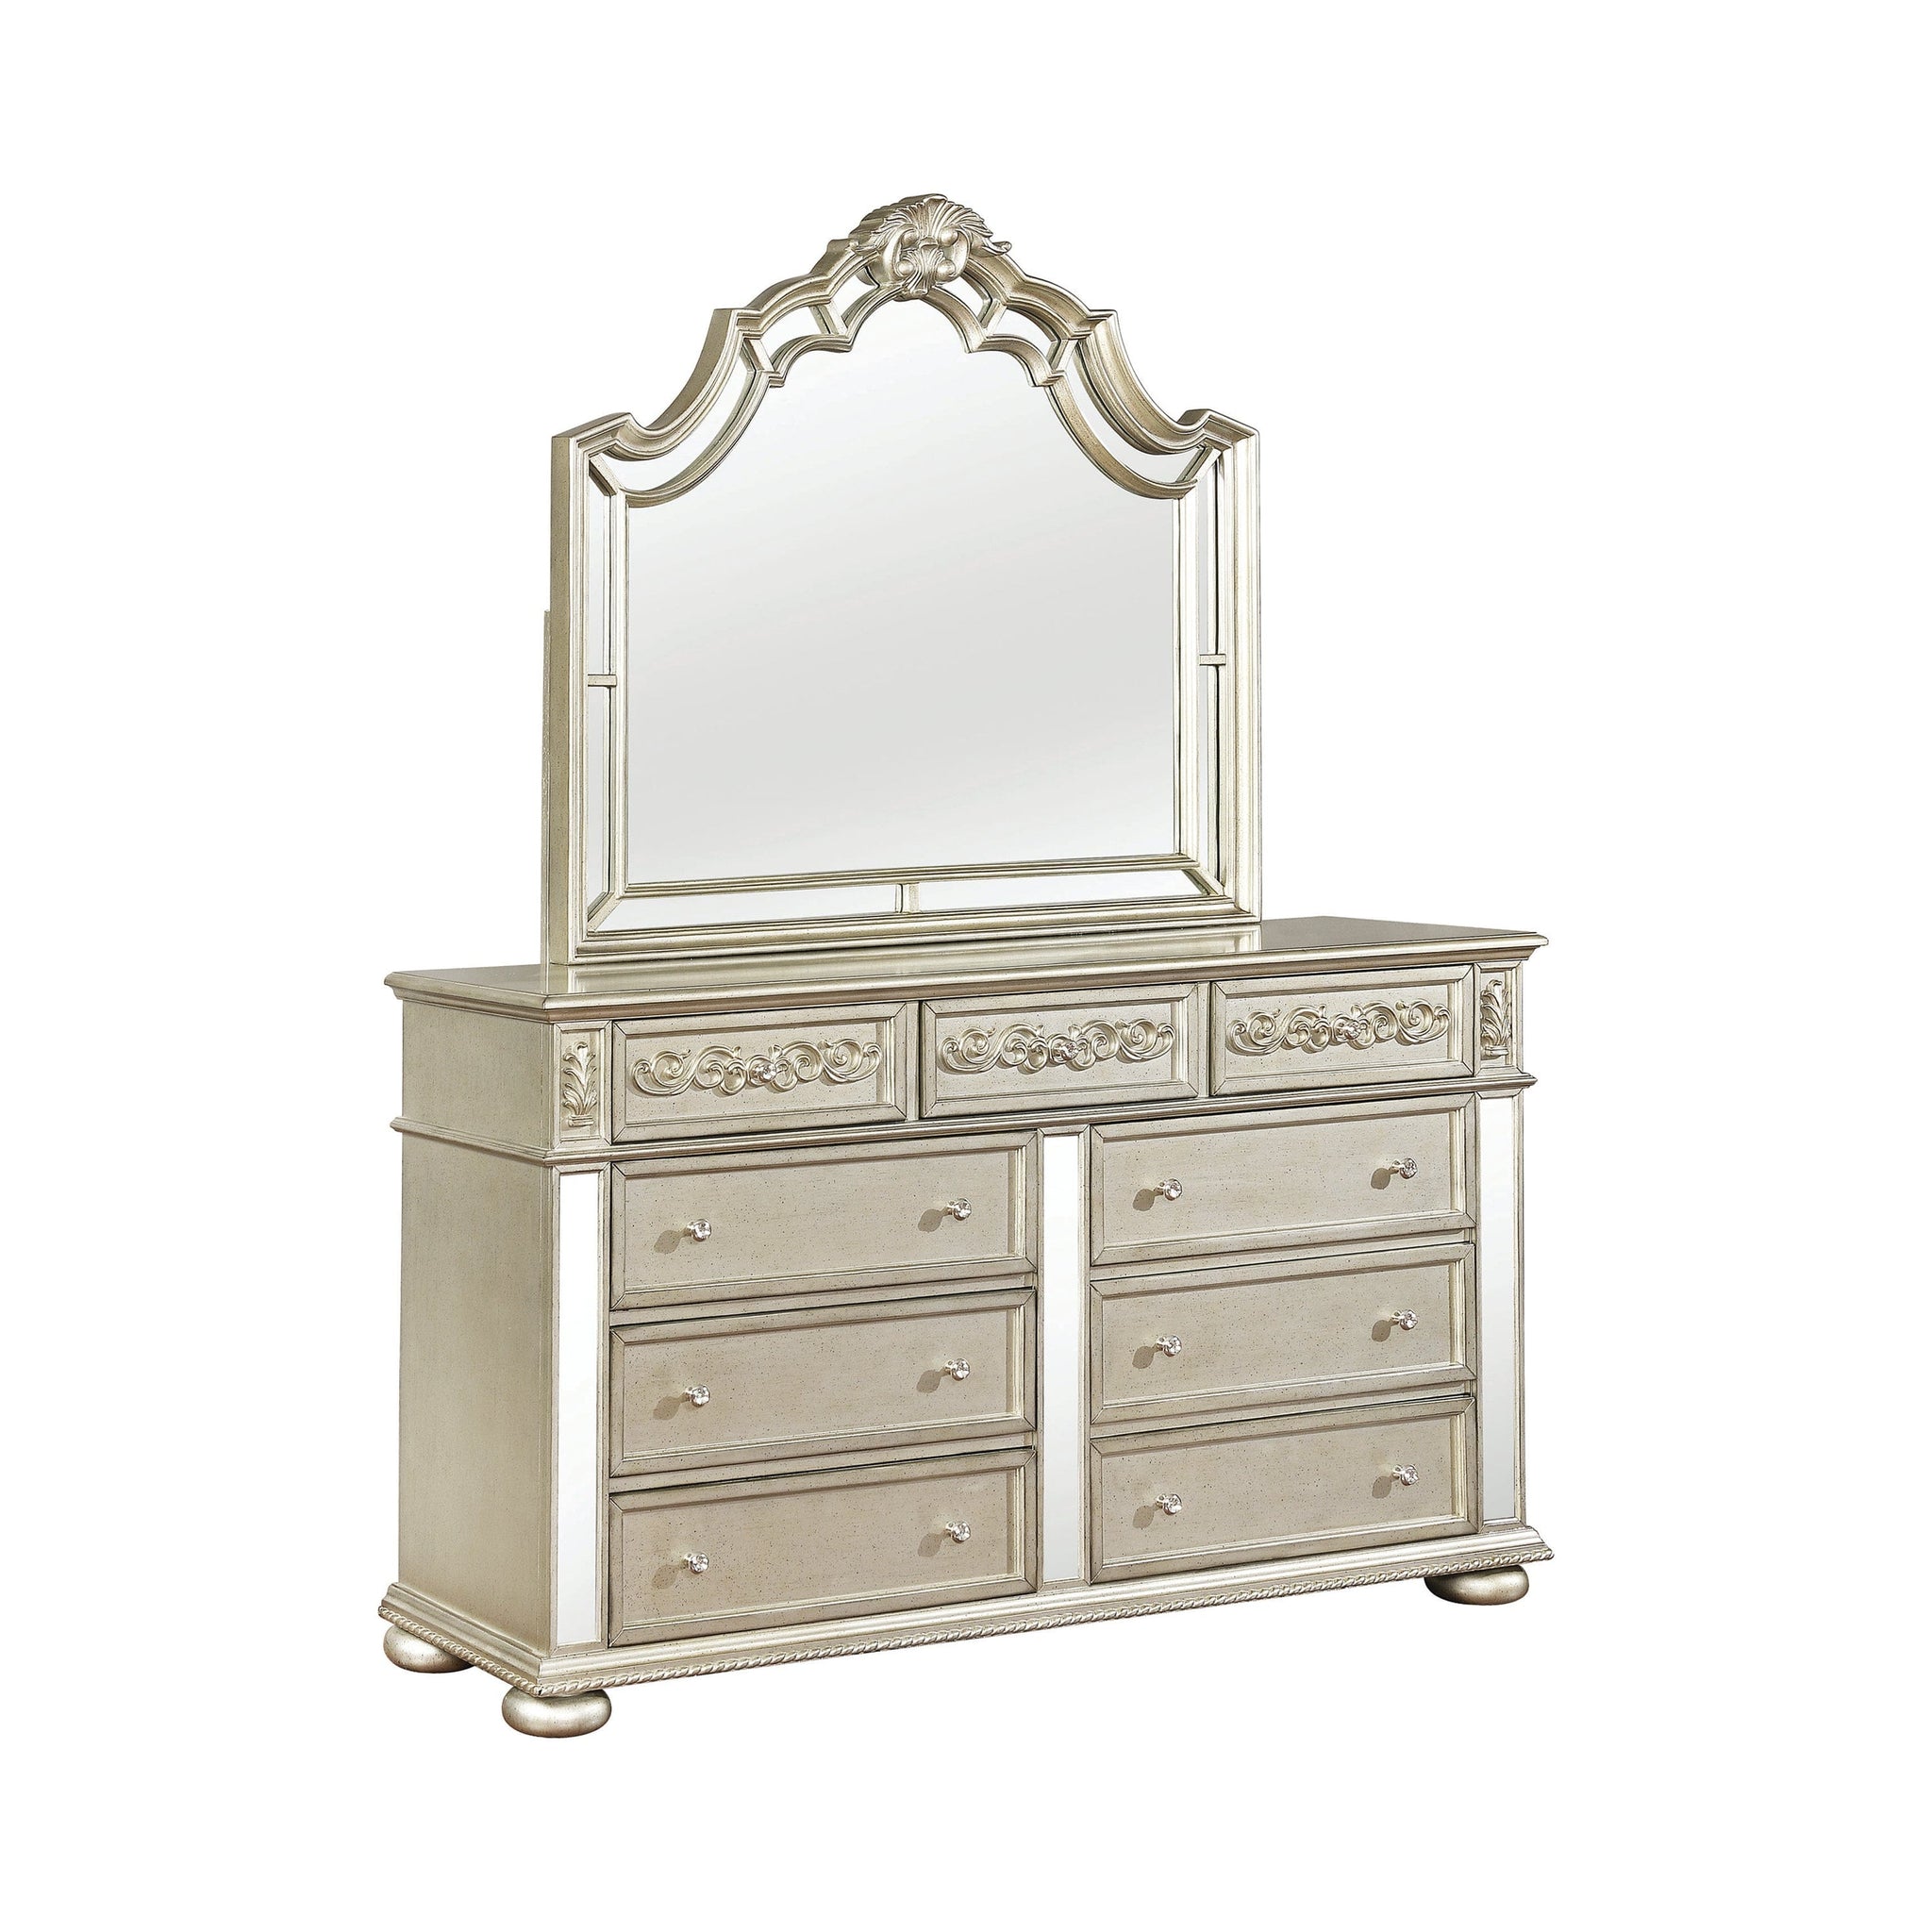 Heidi 9-Drawer Dresser Metallic Platinum Collection: Add A Luxurious Style To Your Bedroom With This Glamorous Dresser, Metallic Platinum Finish For A Luxurious Touch, Plenty Of Space To Store Your Jewelry And Many More Heidi SKU: 222733